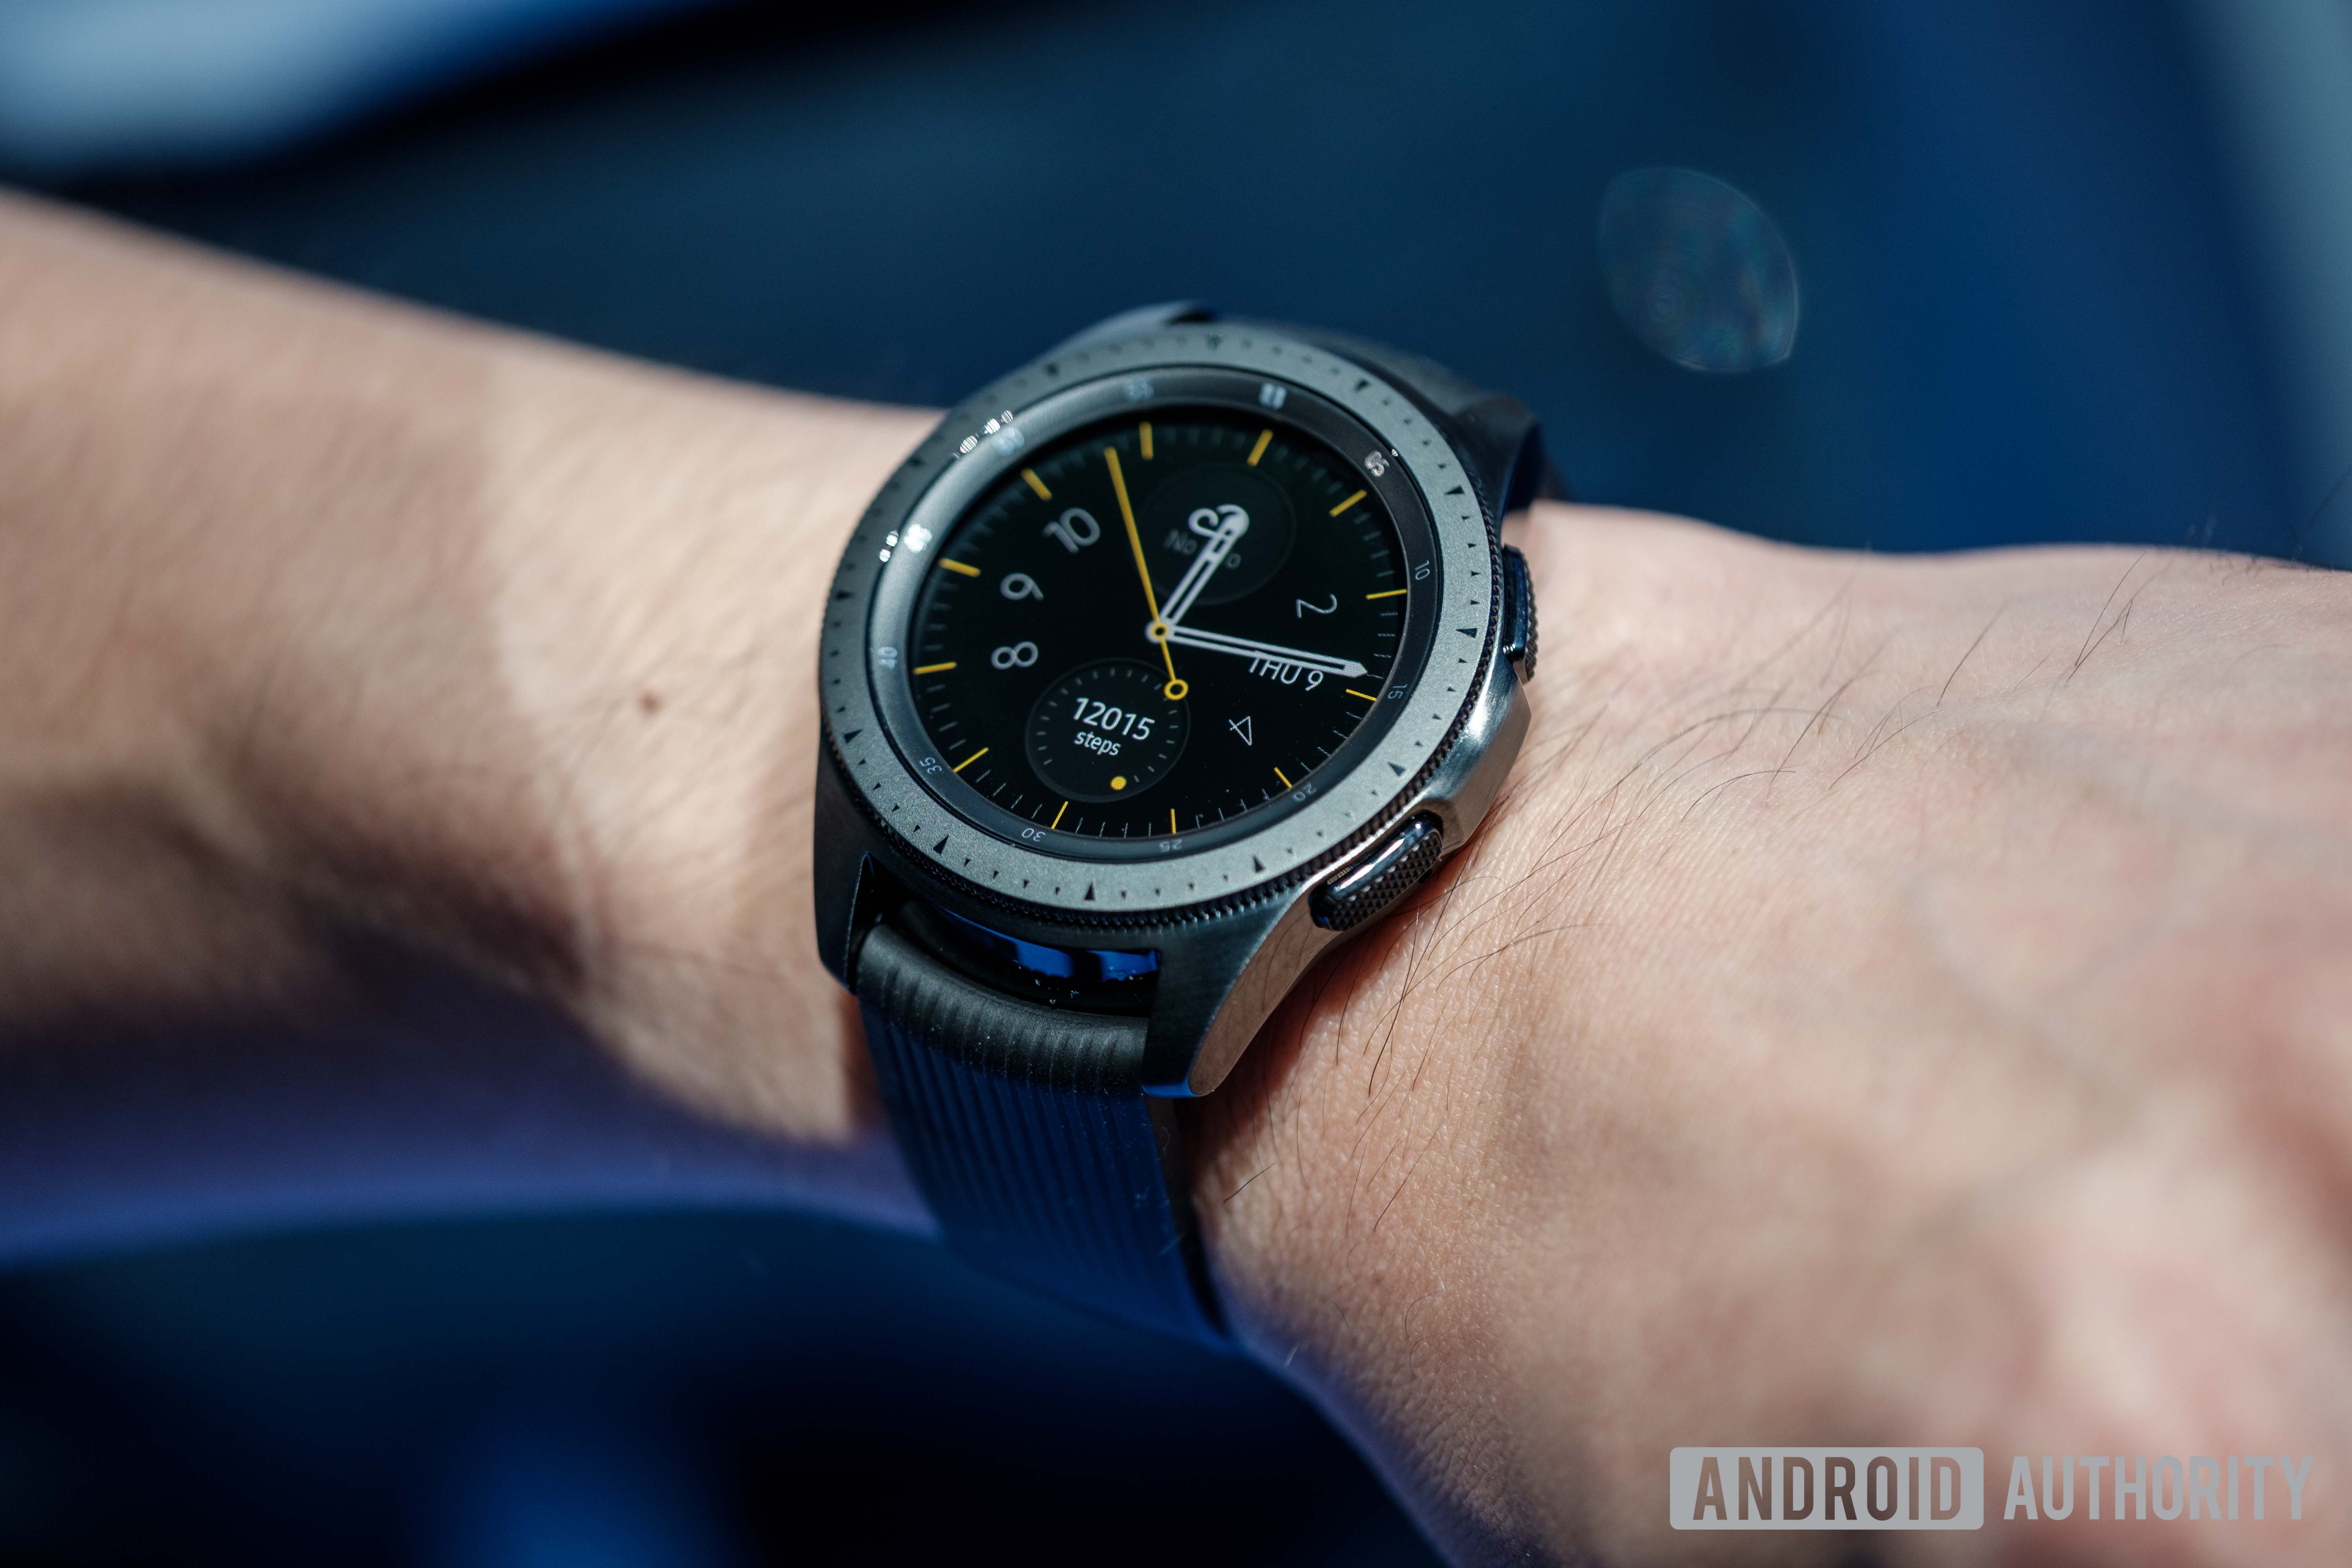 Samsung Galaxy Watch specs, price, release date, and more!